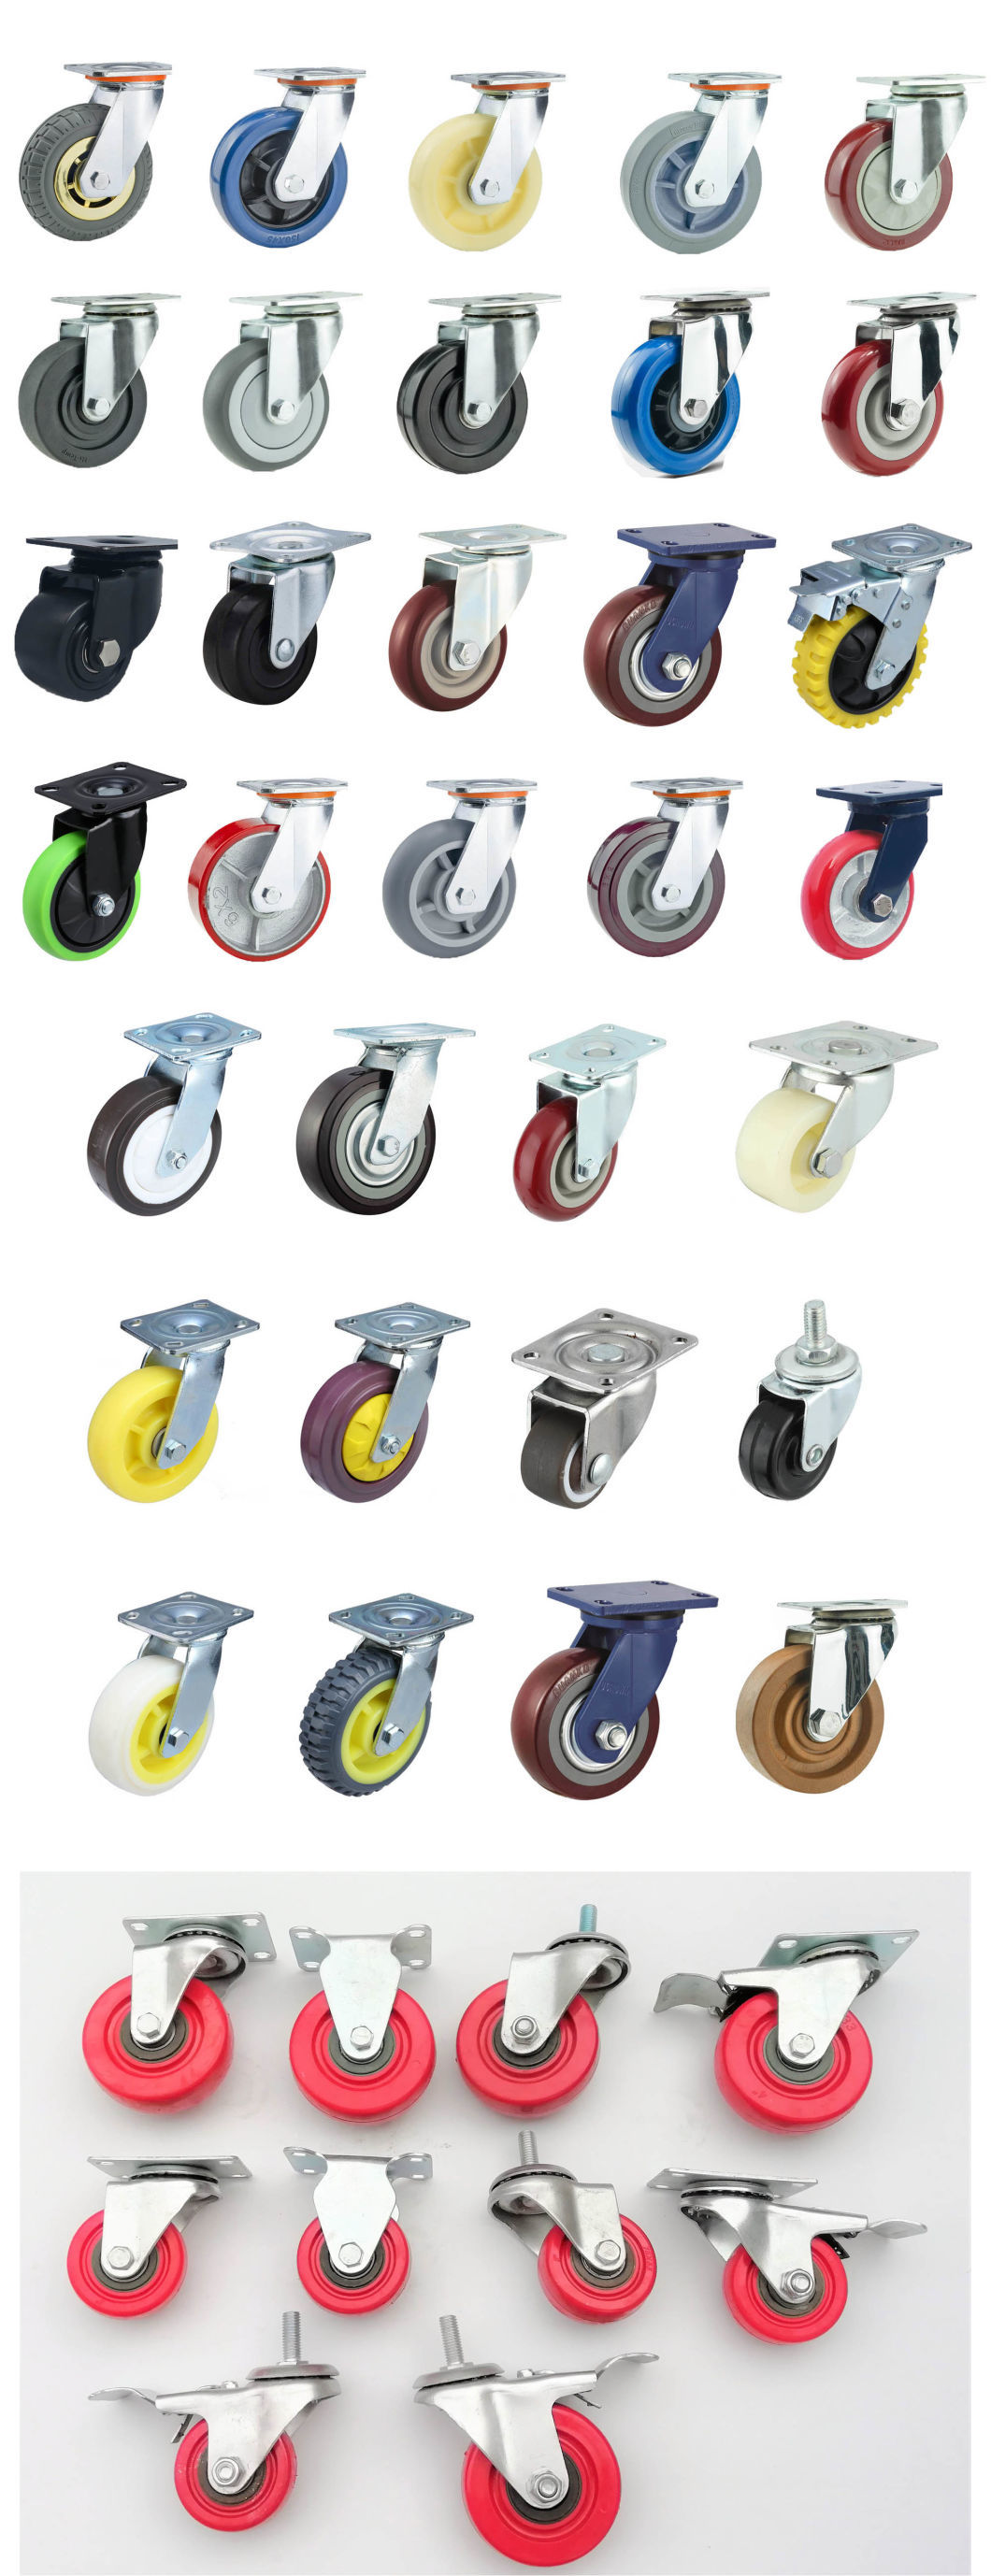 Industrial Casters Factory Diameter 30/50/75/100mm Pl Material Caster Wheel